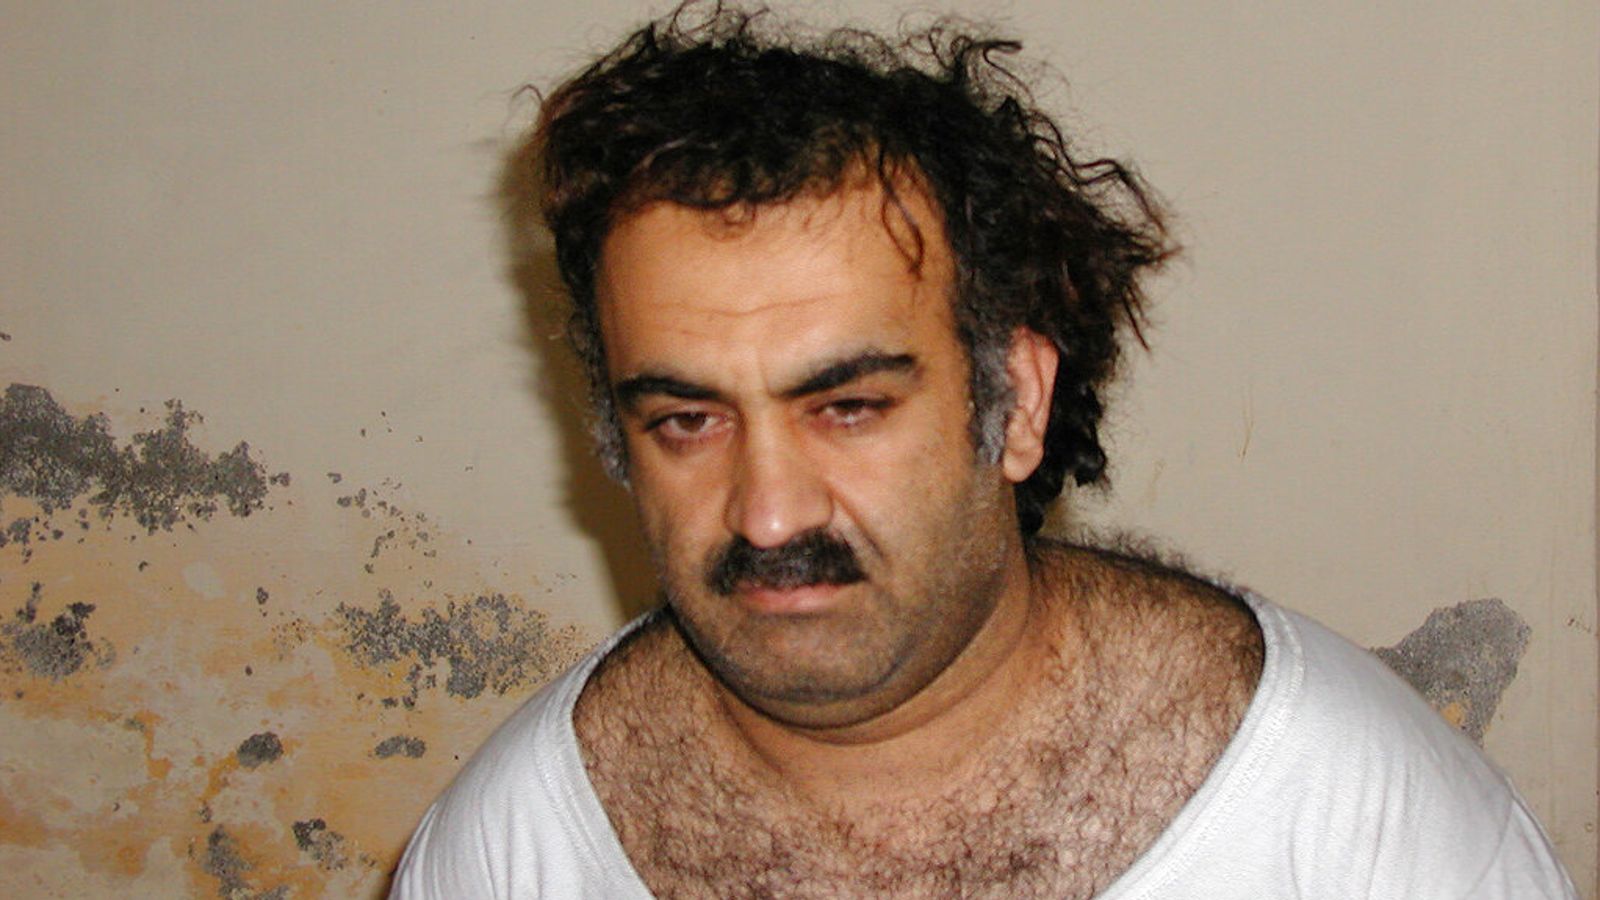 9/11 mastermind Khalid Sheikh Mohammed and co-conspirators may avoid death penalty in new plea deal